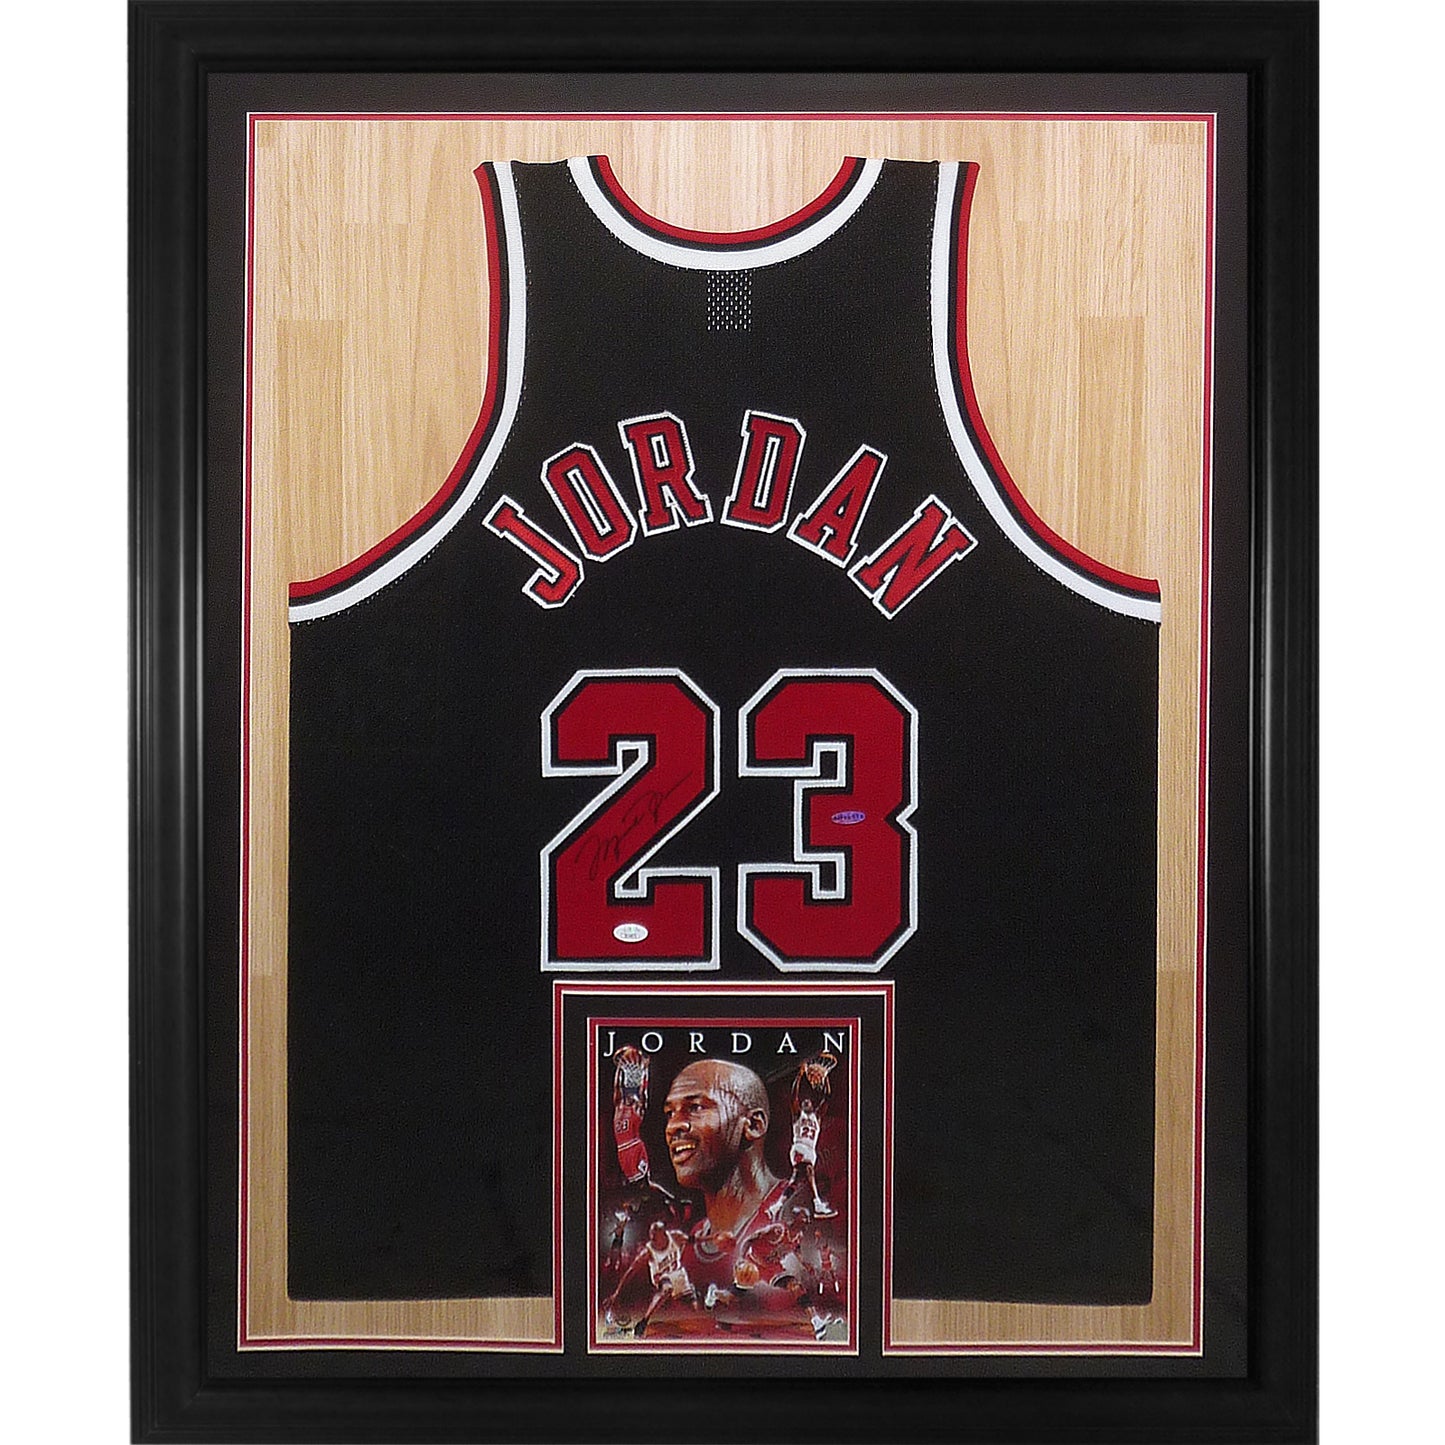 Michael Jordan Autographed and Framed White Bulls Jersey